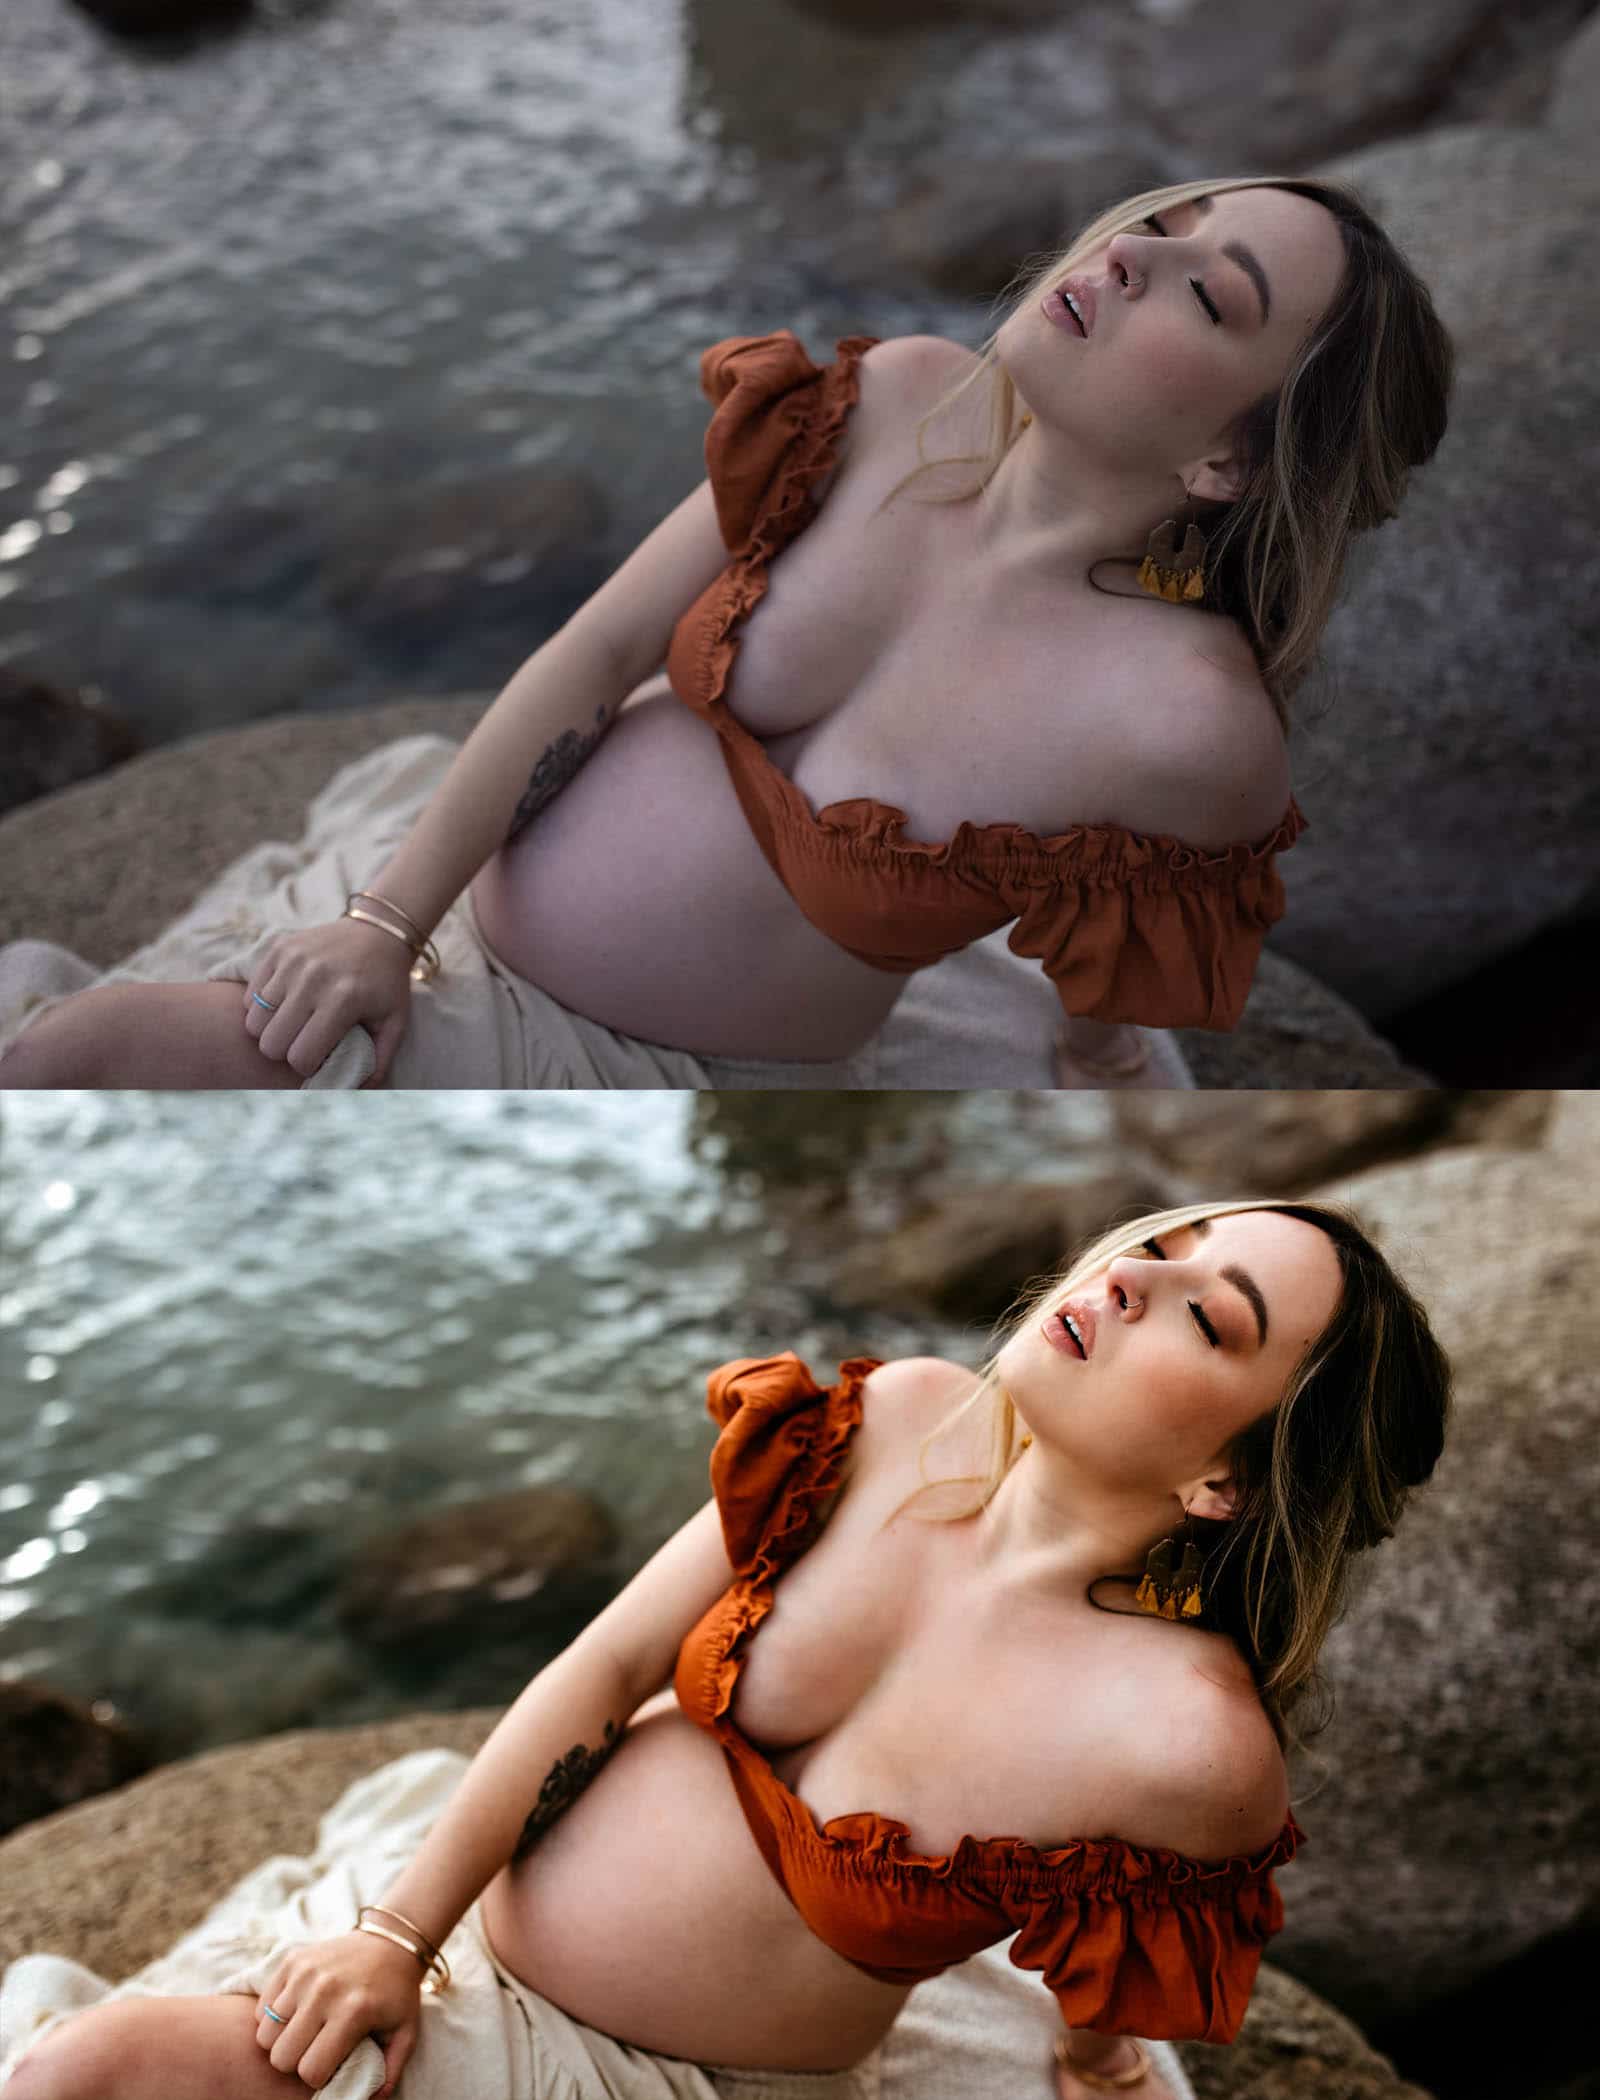 editing before and after